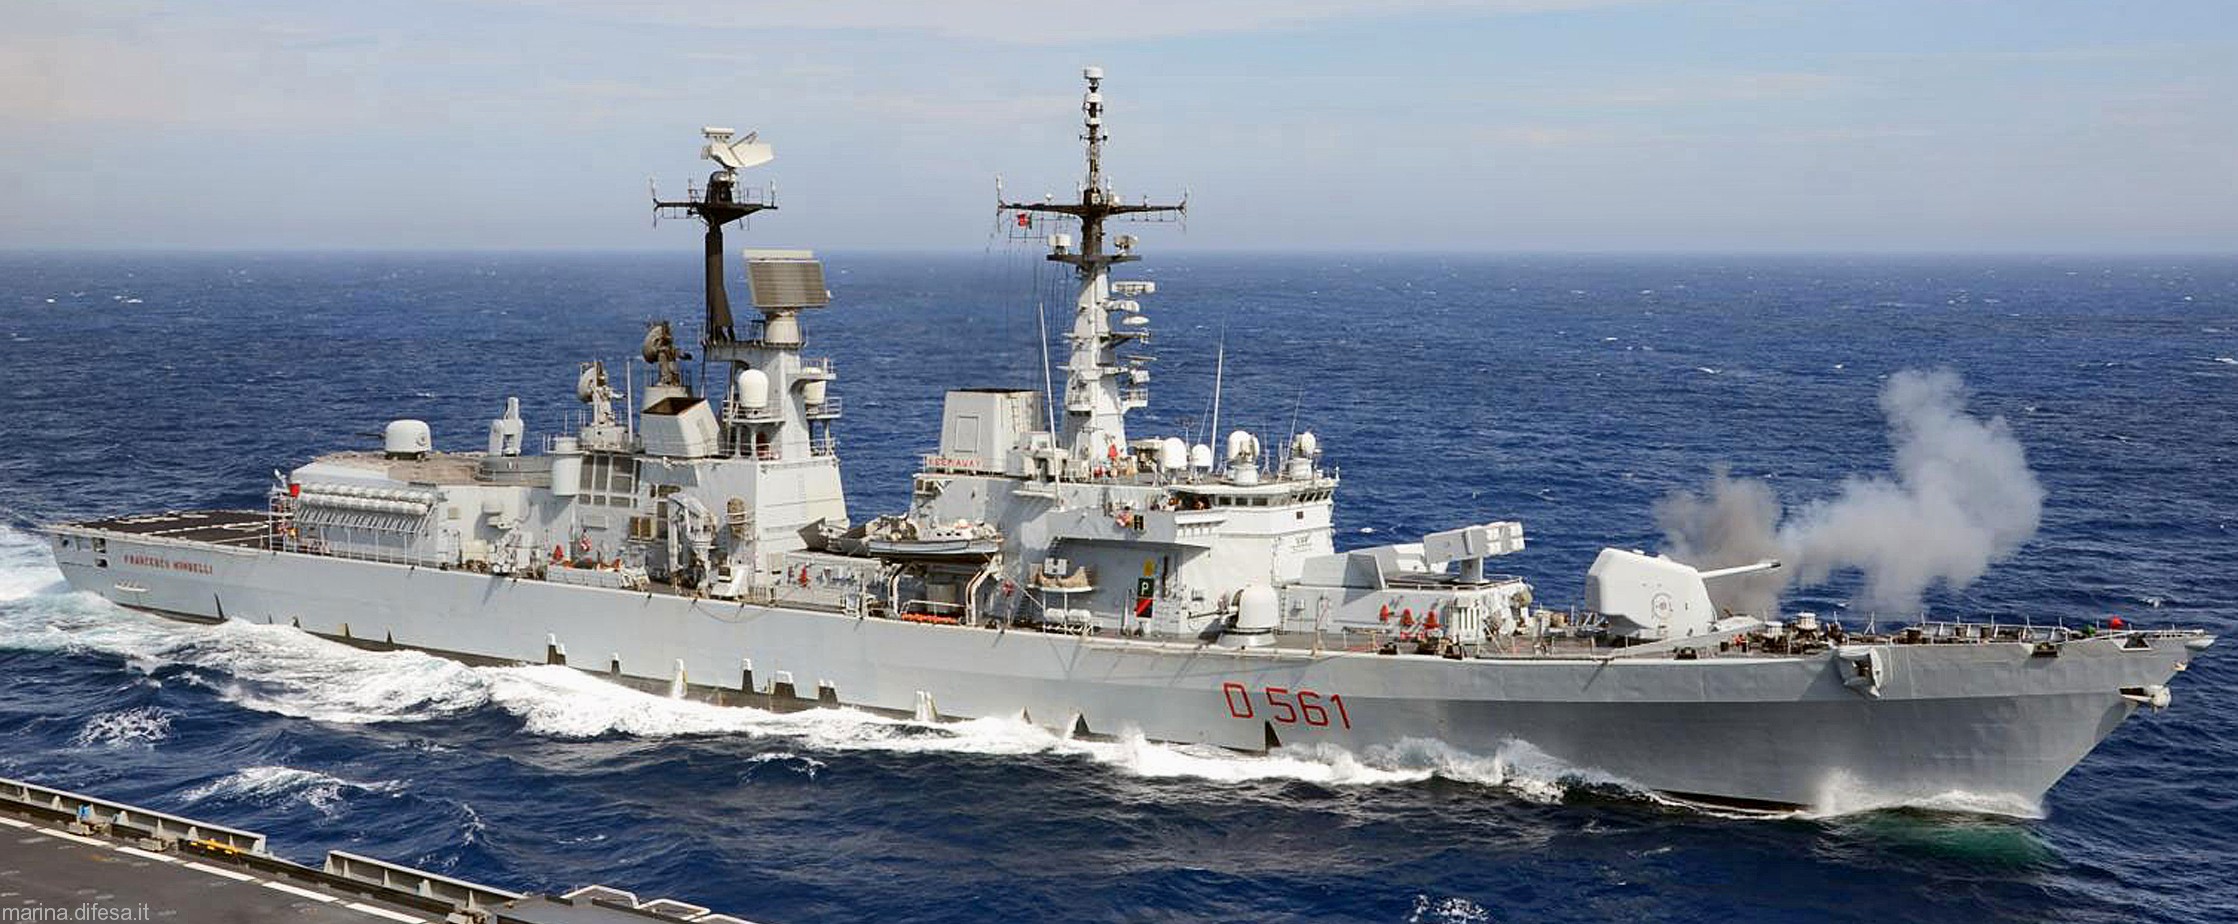 d-561 francesco mimbelli its nave guided missile destroyer ddg italian navy marina militare 26